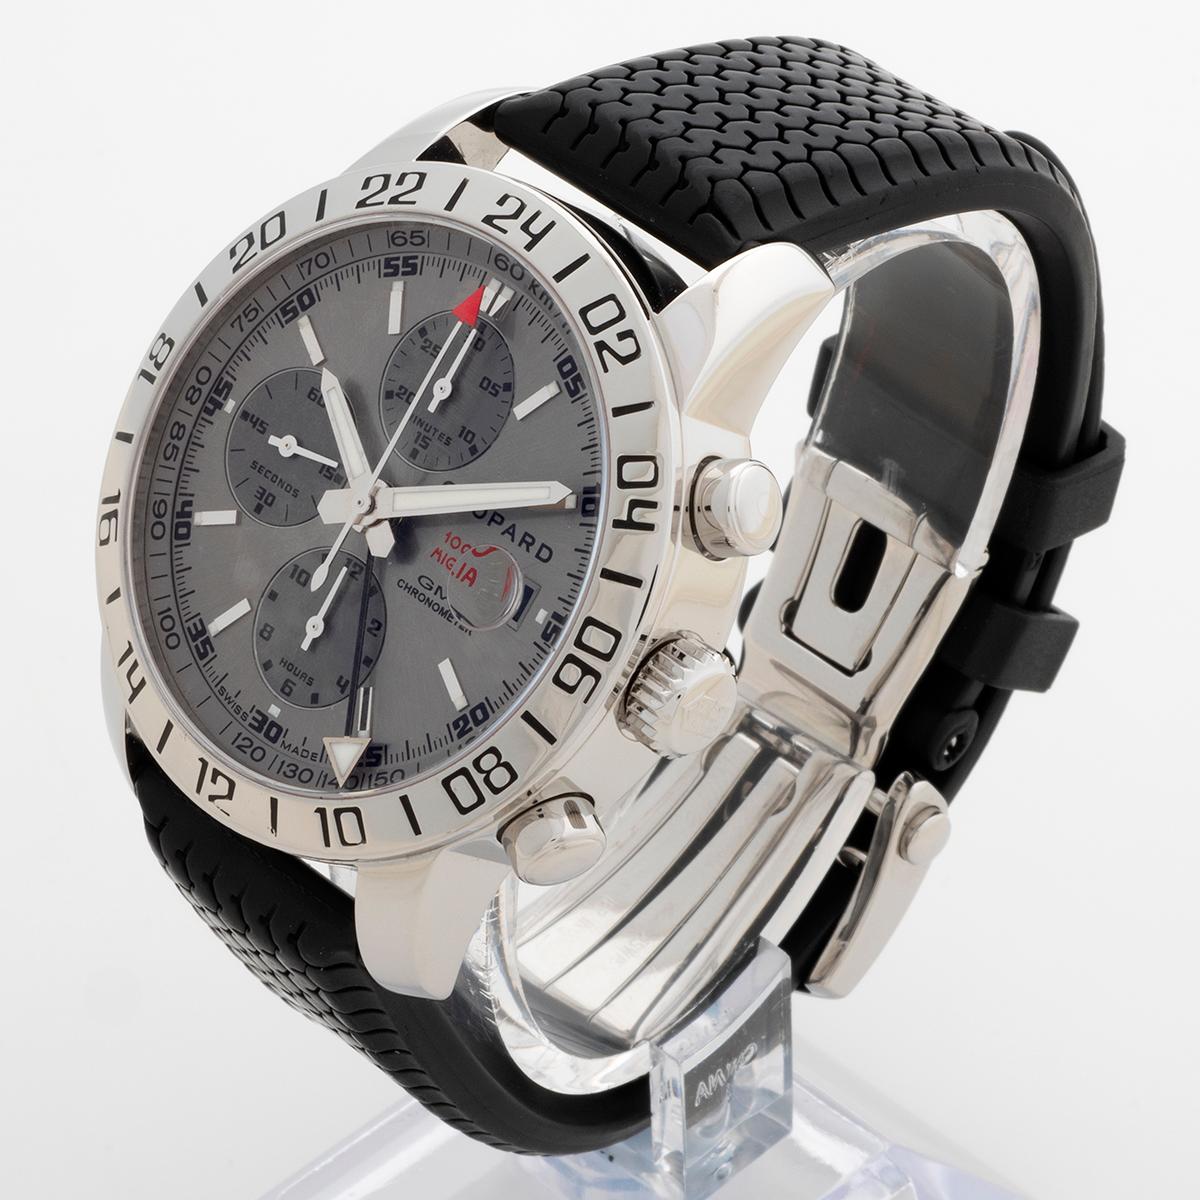 Chopard Mille Miglia Chronograph GMT Wristwatch Ref 168992. Grey Rhodium Dial. In Excellent Condition For Sale In Canterbury, GB